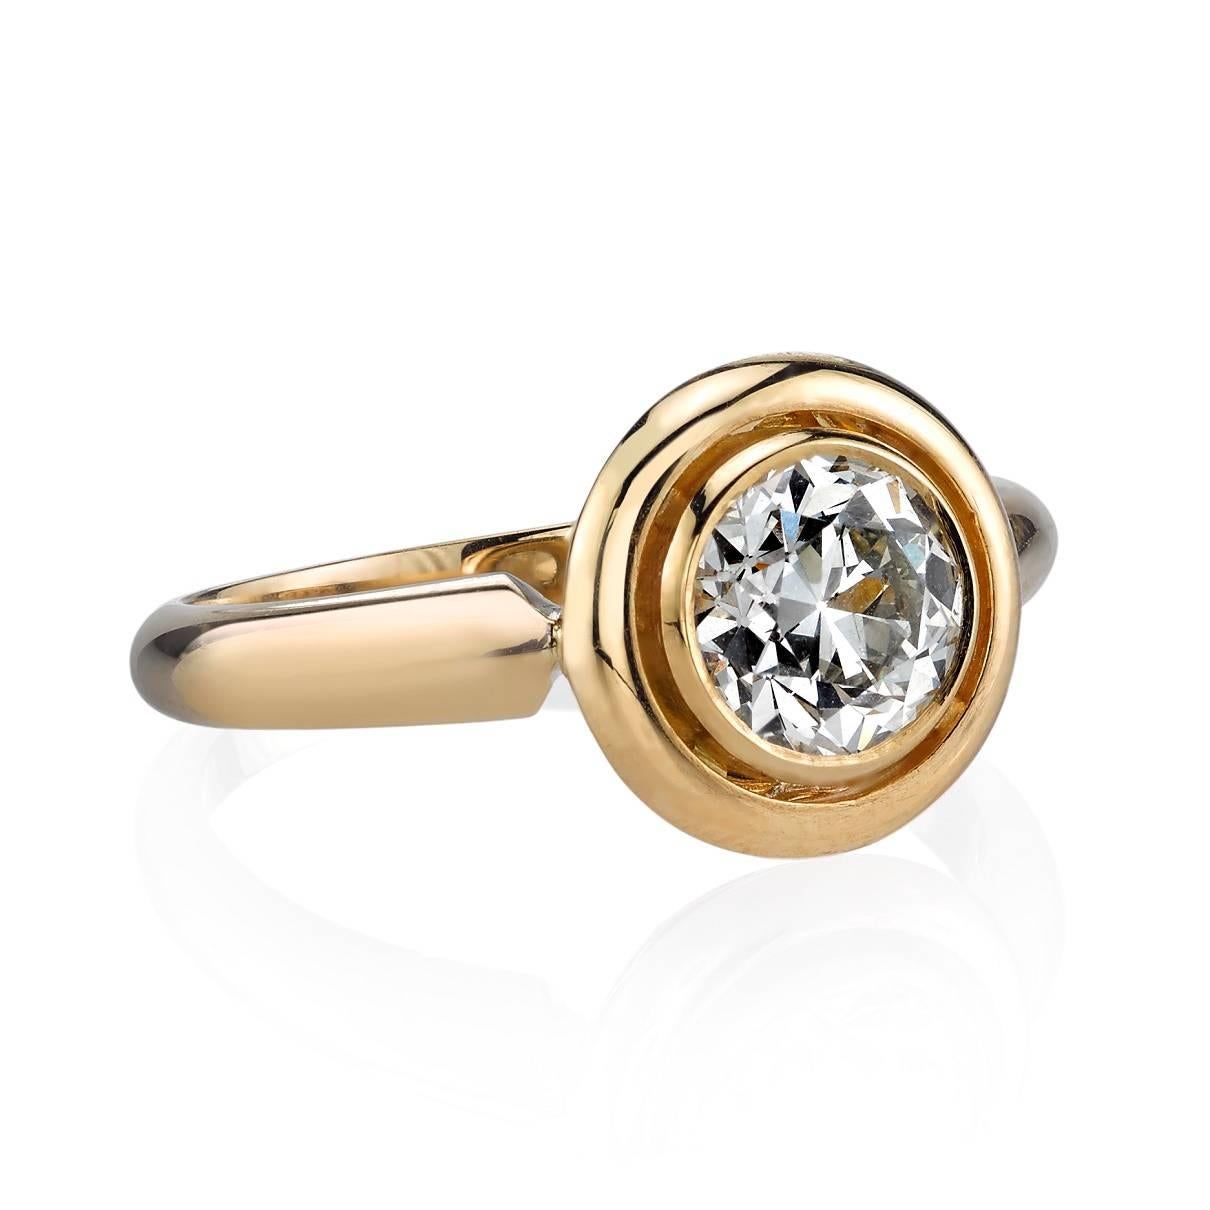 1.02ct I/VS2 EGL certified old European cut diamond set in a handcrafted 18k yellow gold mounting. 


